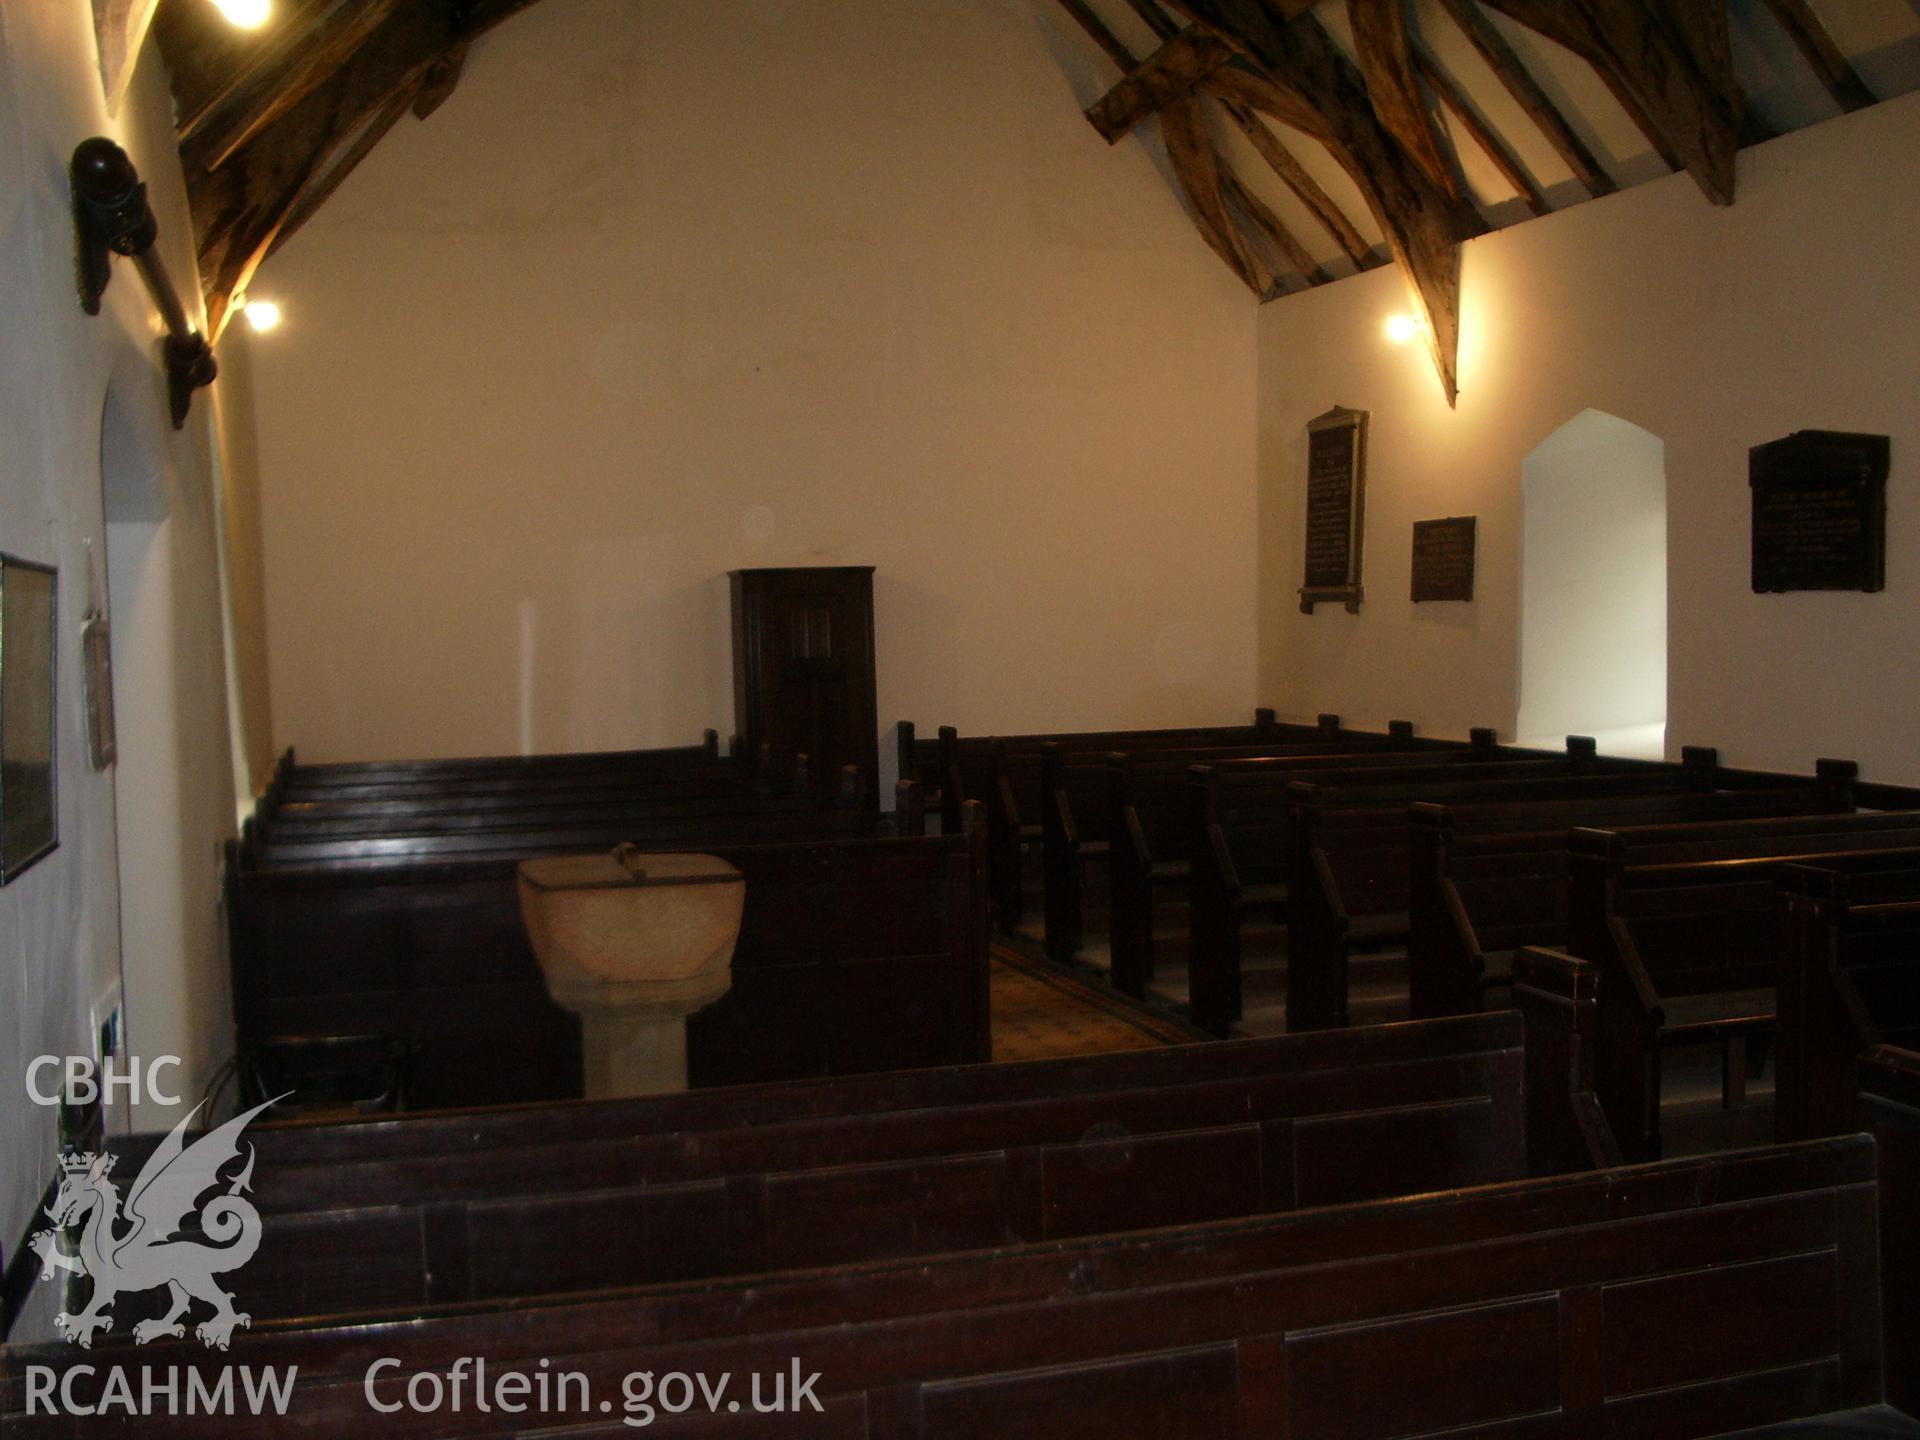 Interior view of the church looking west, showing the pews and the font.